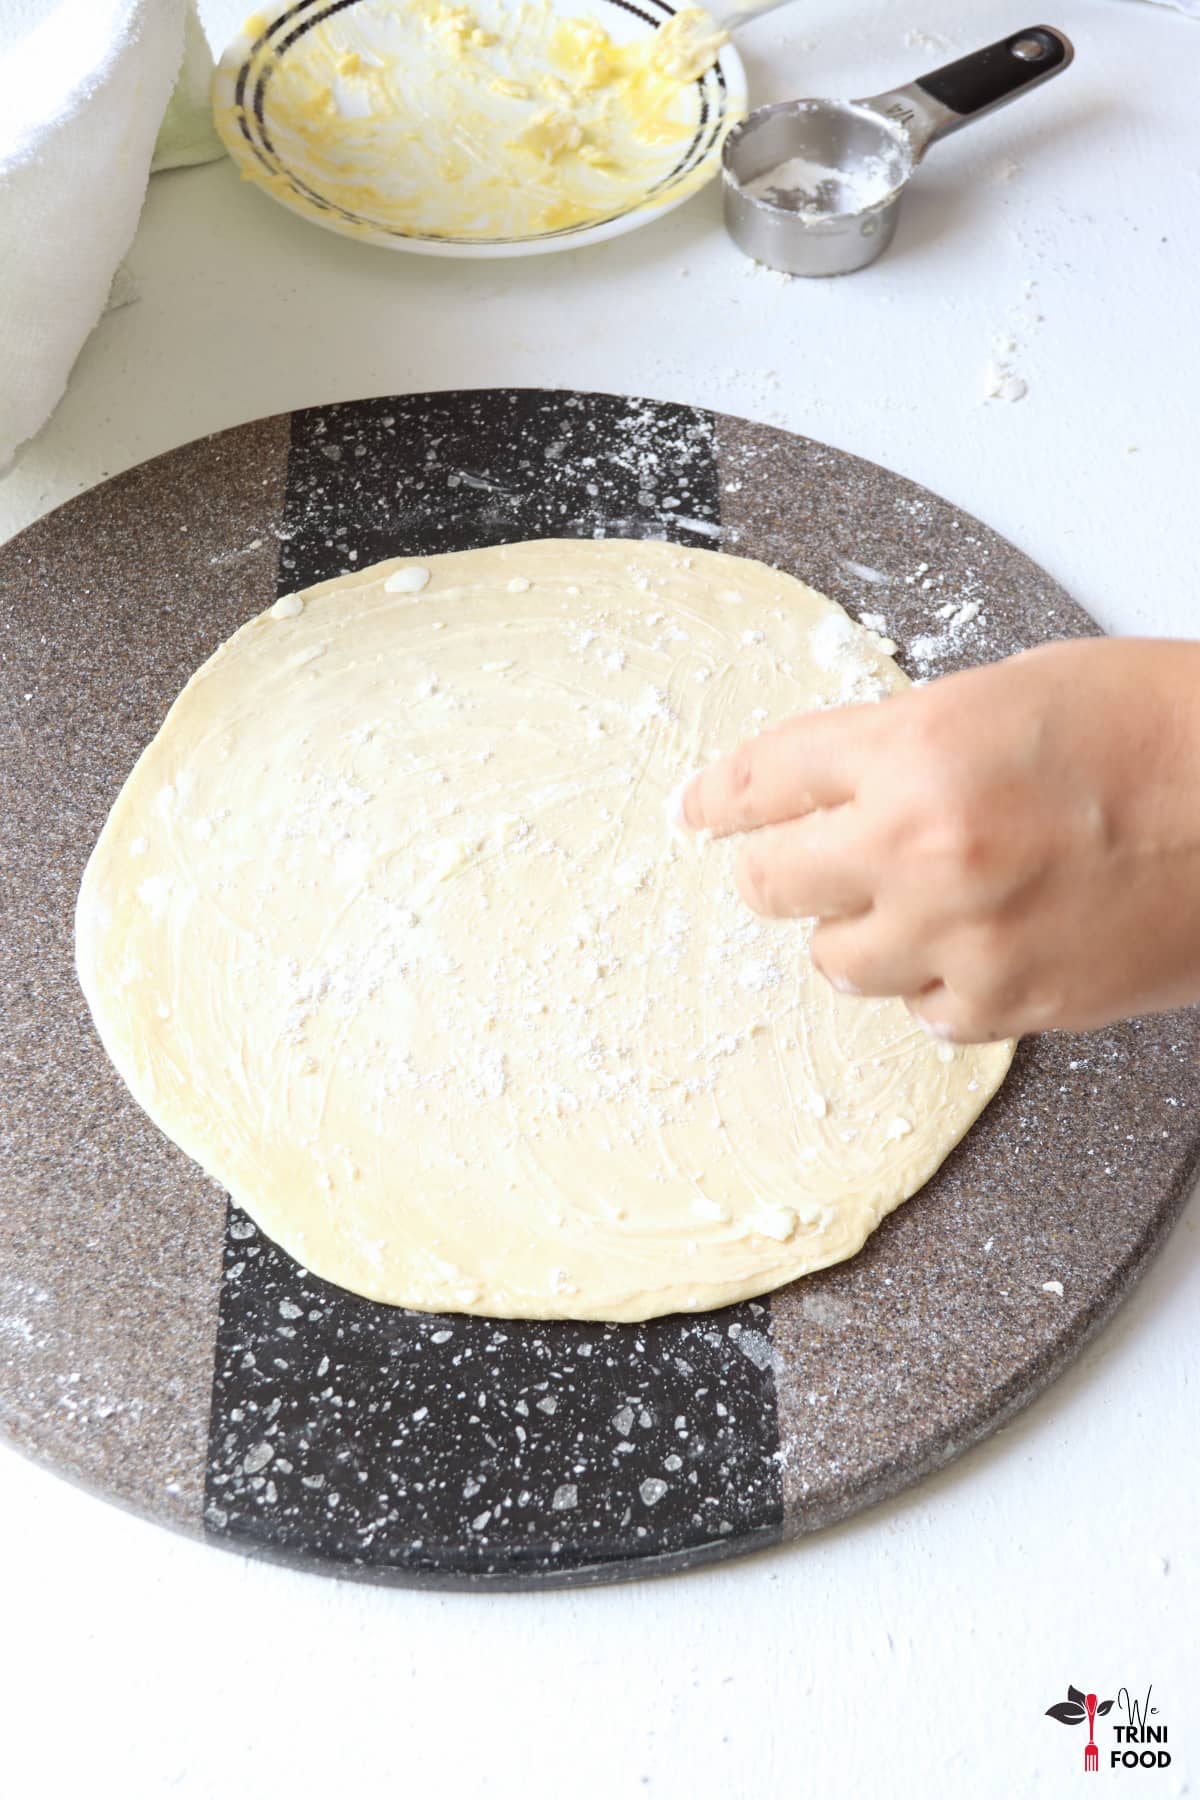 sprinkle flour over the buttered roti on a gray rolling surface